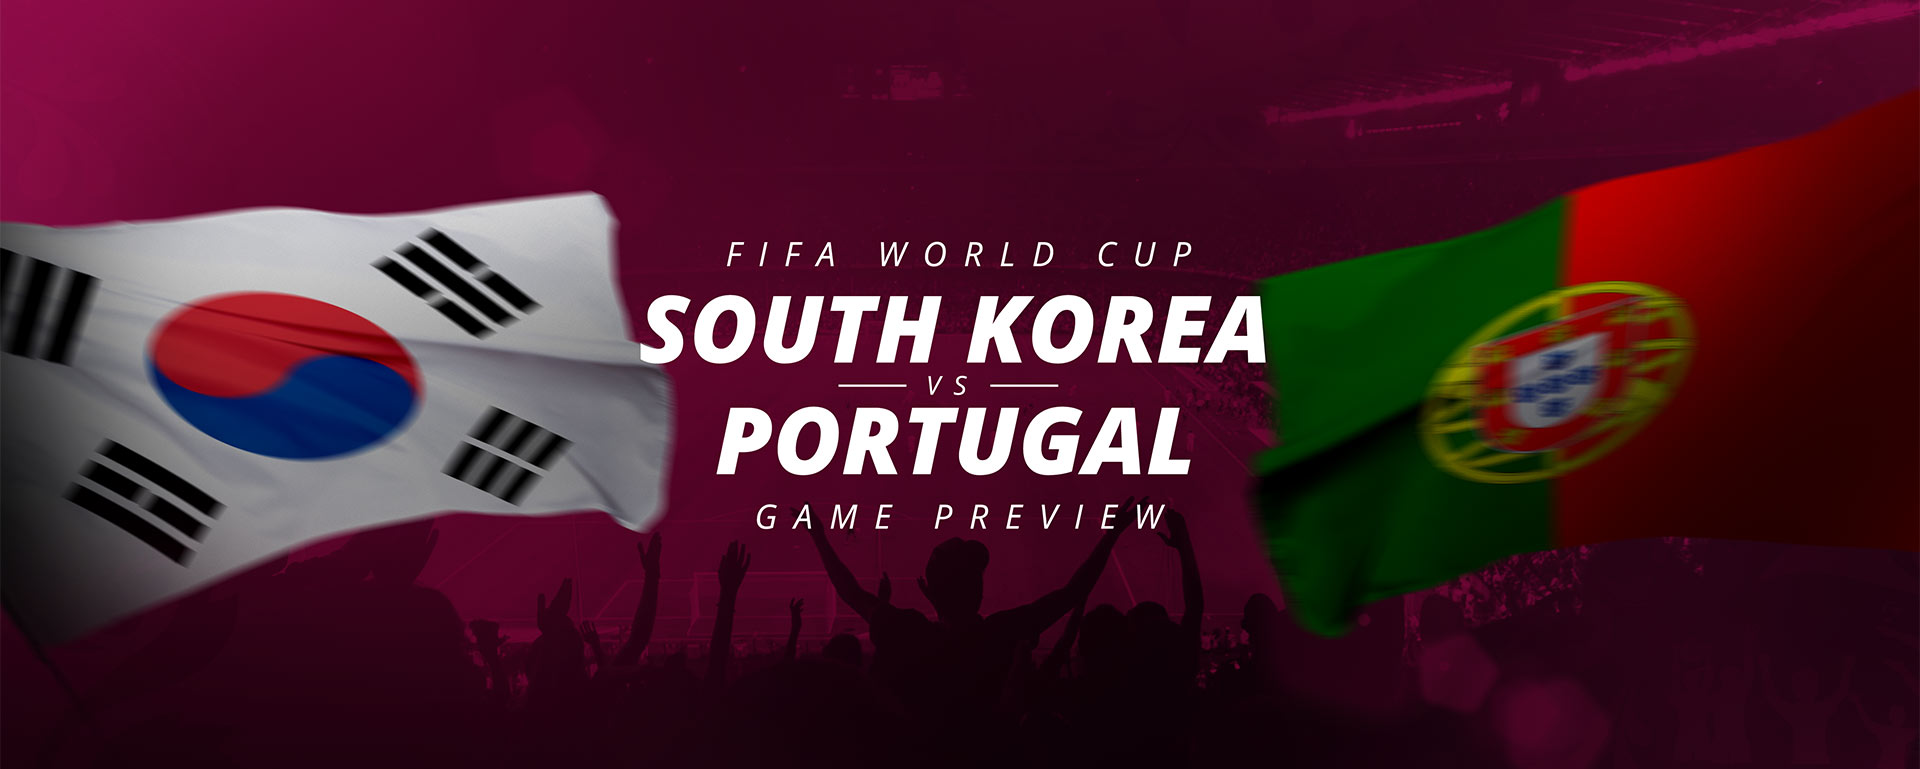 FIFA WORLD CUP: SOUTH KOREA V PORTUGAL – GAME PREVIEW